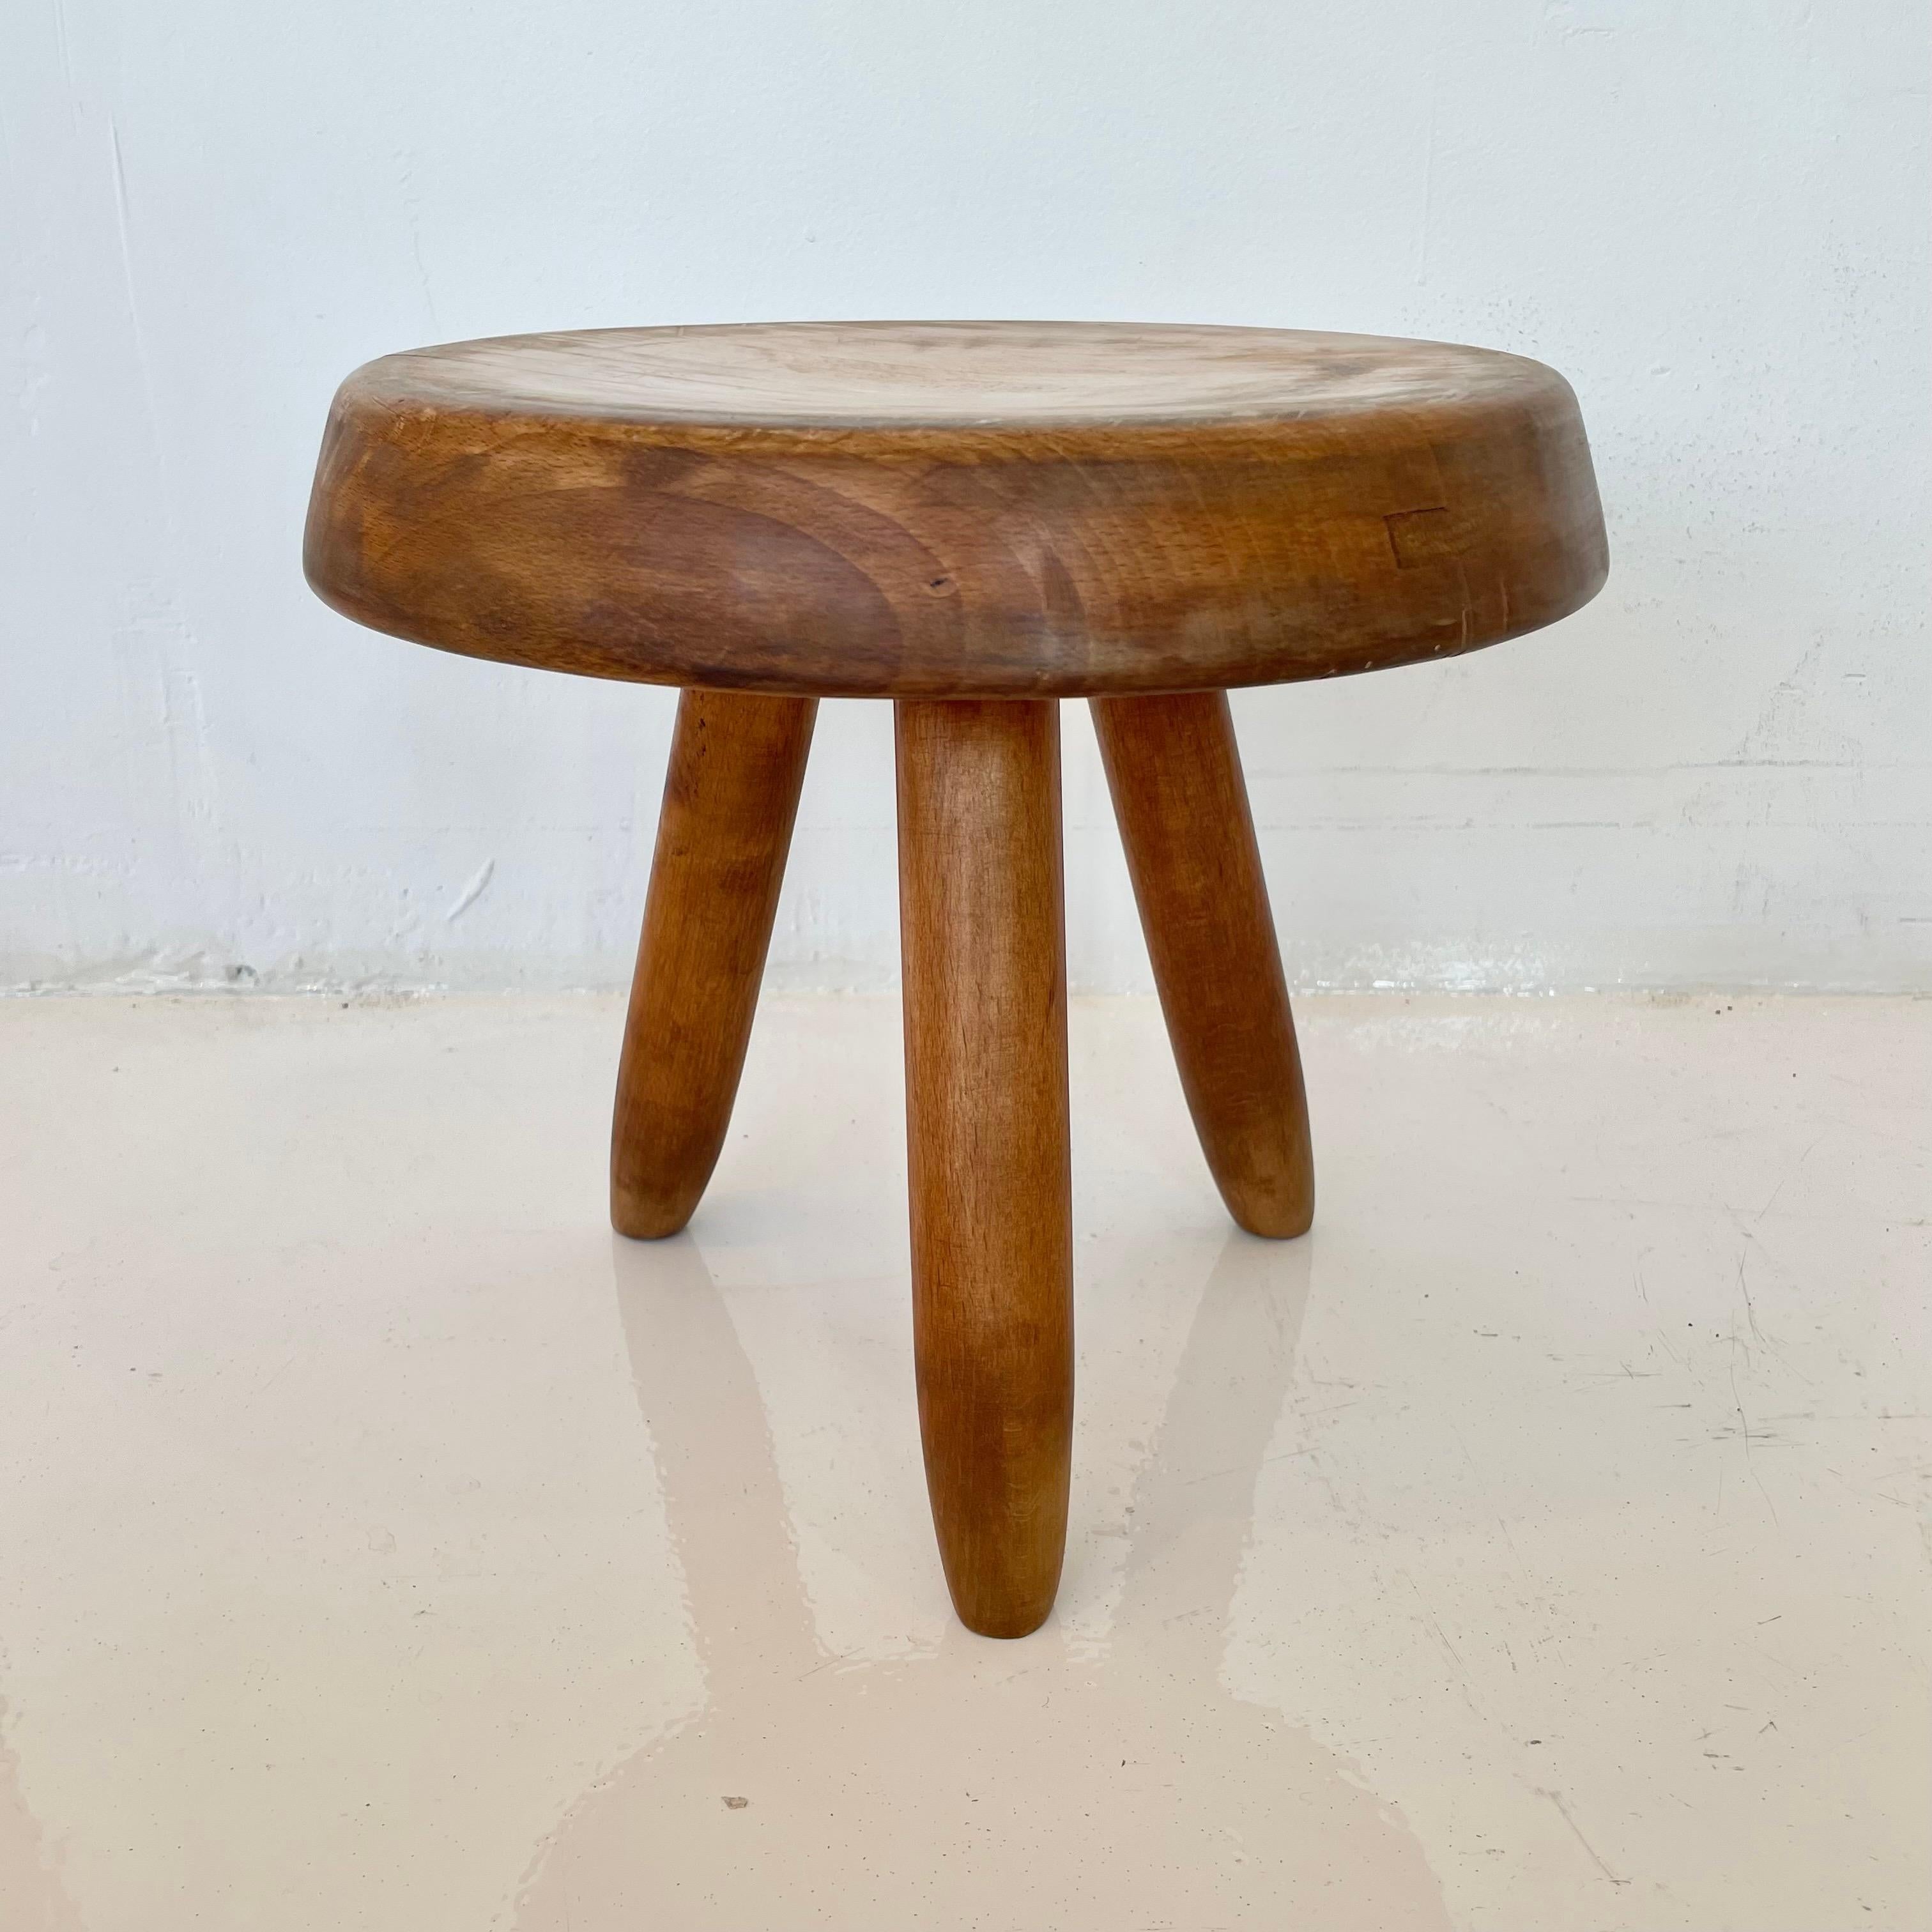 Collectible Berger stool by Charlotte Perriand. Circa 1950s. This french oak stool is in good condition, with slight wear and excellent patina. You can find this stool featured in the Charlotte Perriand complete works Volume 2.